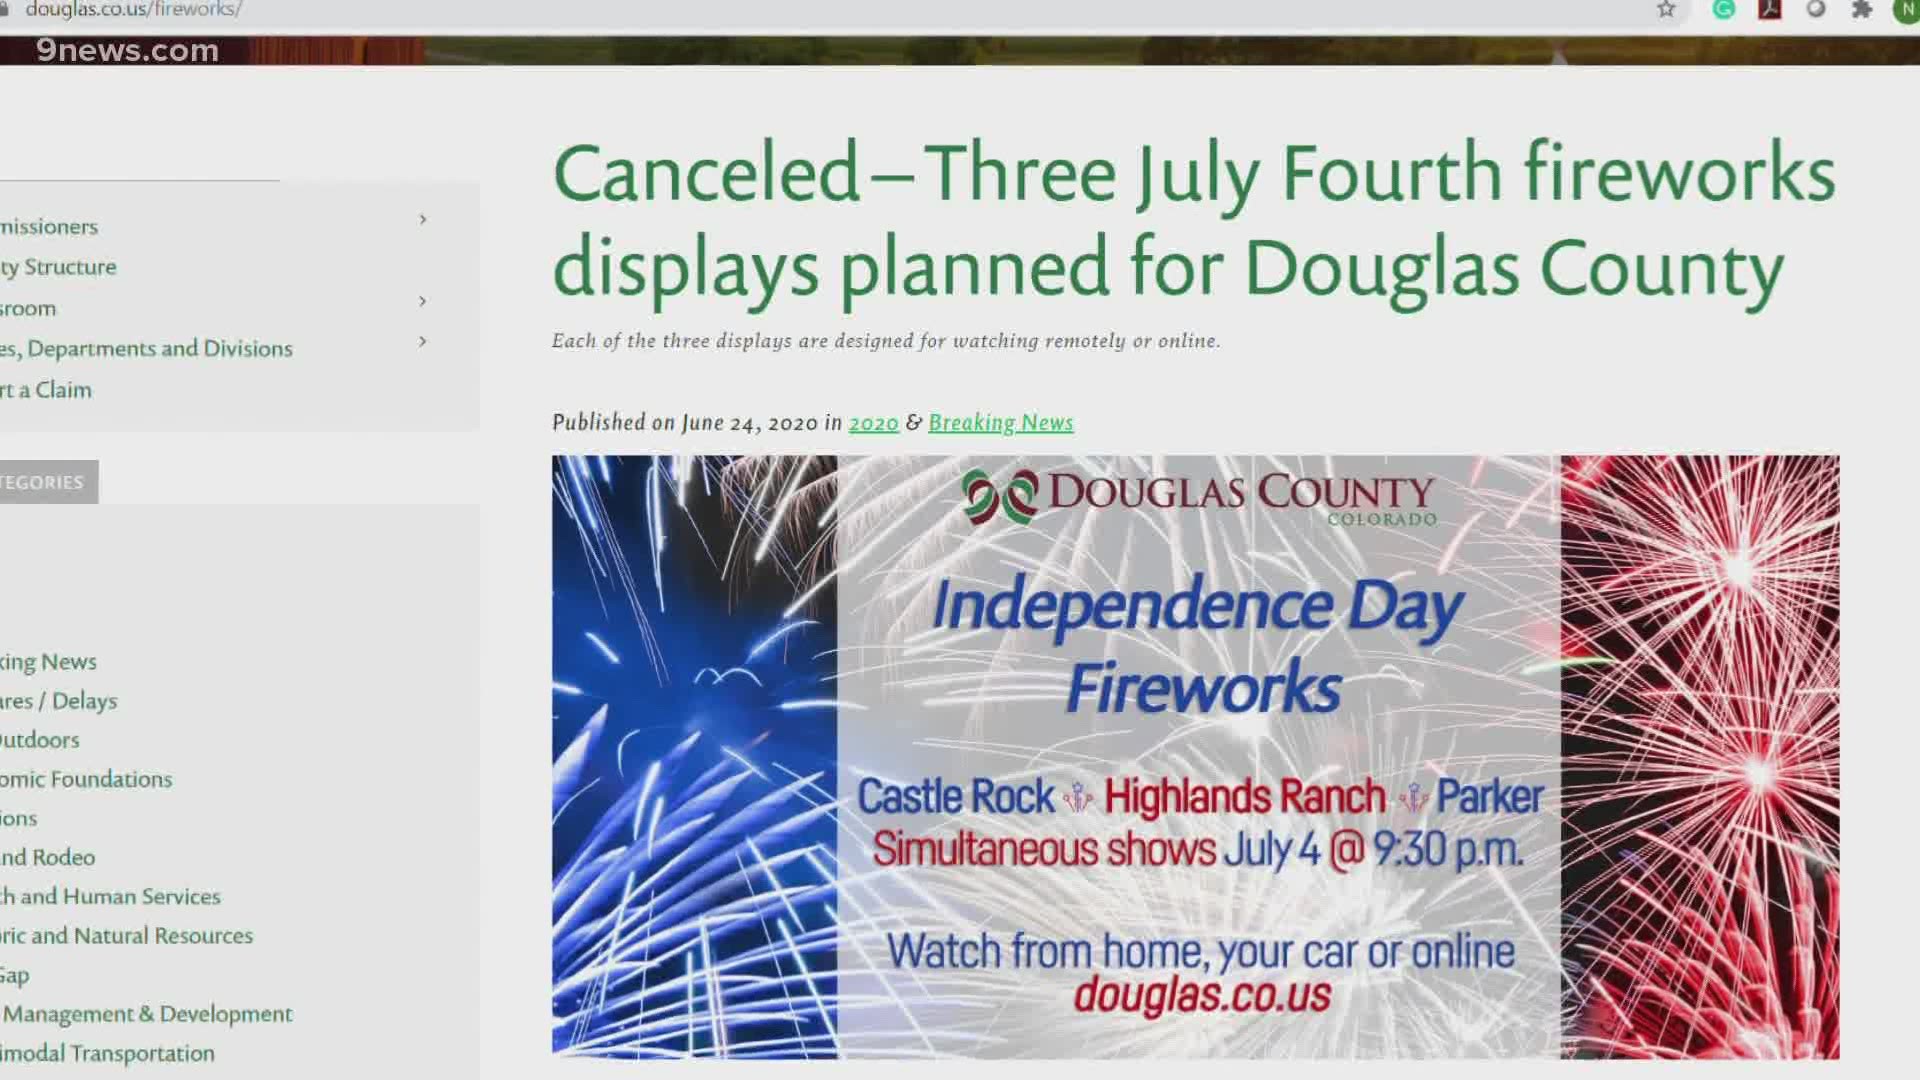 Cities are canceling fireworks celebrations among concerns for fire safety and the spread of coronavirus. Douglas County canceled three shows due to dry conditions.